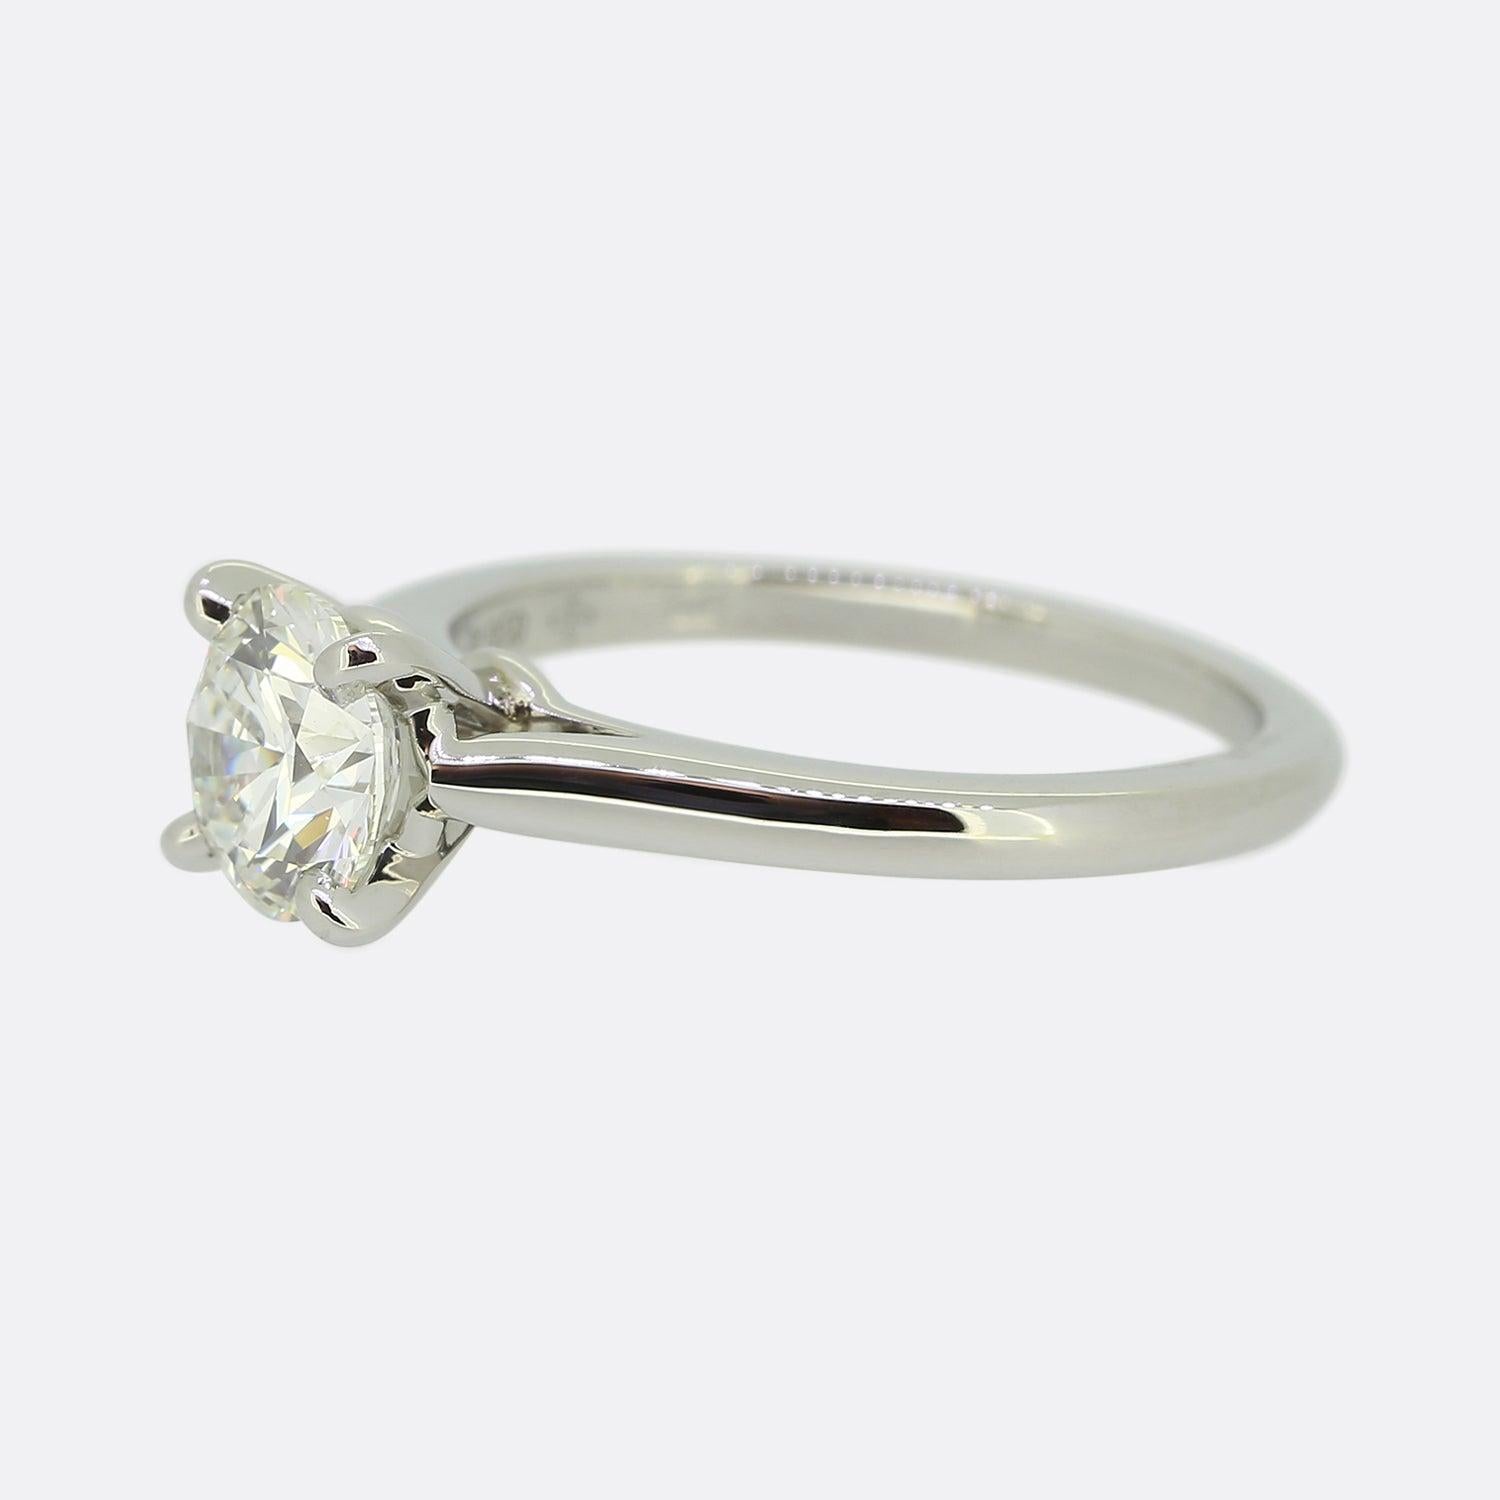 Here we have a classic diamond solitaire engagement ring from the world renowned jewellery house of Cartier. A marvellous 1.03ct round brilliant cut diamond sits alone and proud in a four clawed setting atop a plain polished platinum